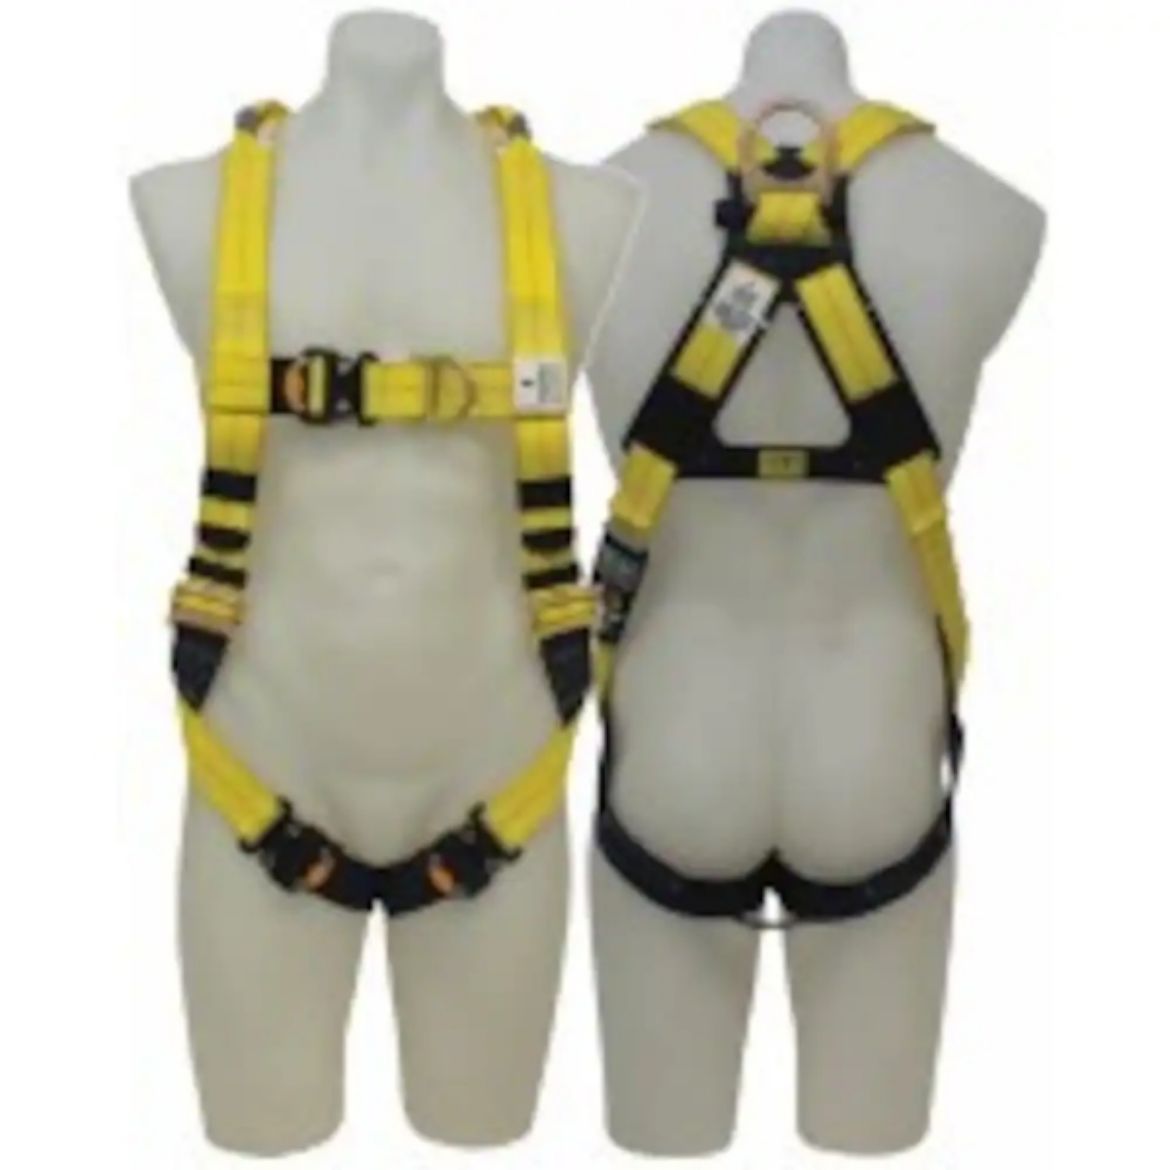 Picture of 803S0054 DELTA RIGGERS HARNESS - SMALL, WITH REAR STAND UP D-RING, FRONT FALL ARREST D-RING, QUICK CONNECT BUCKLES & CONFINED SPACE LOOPS